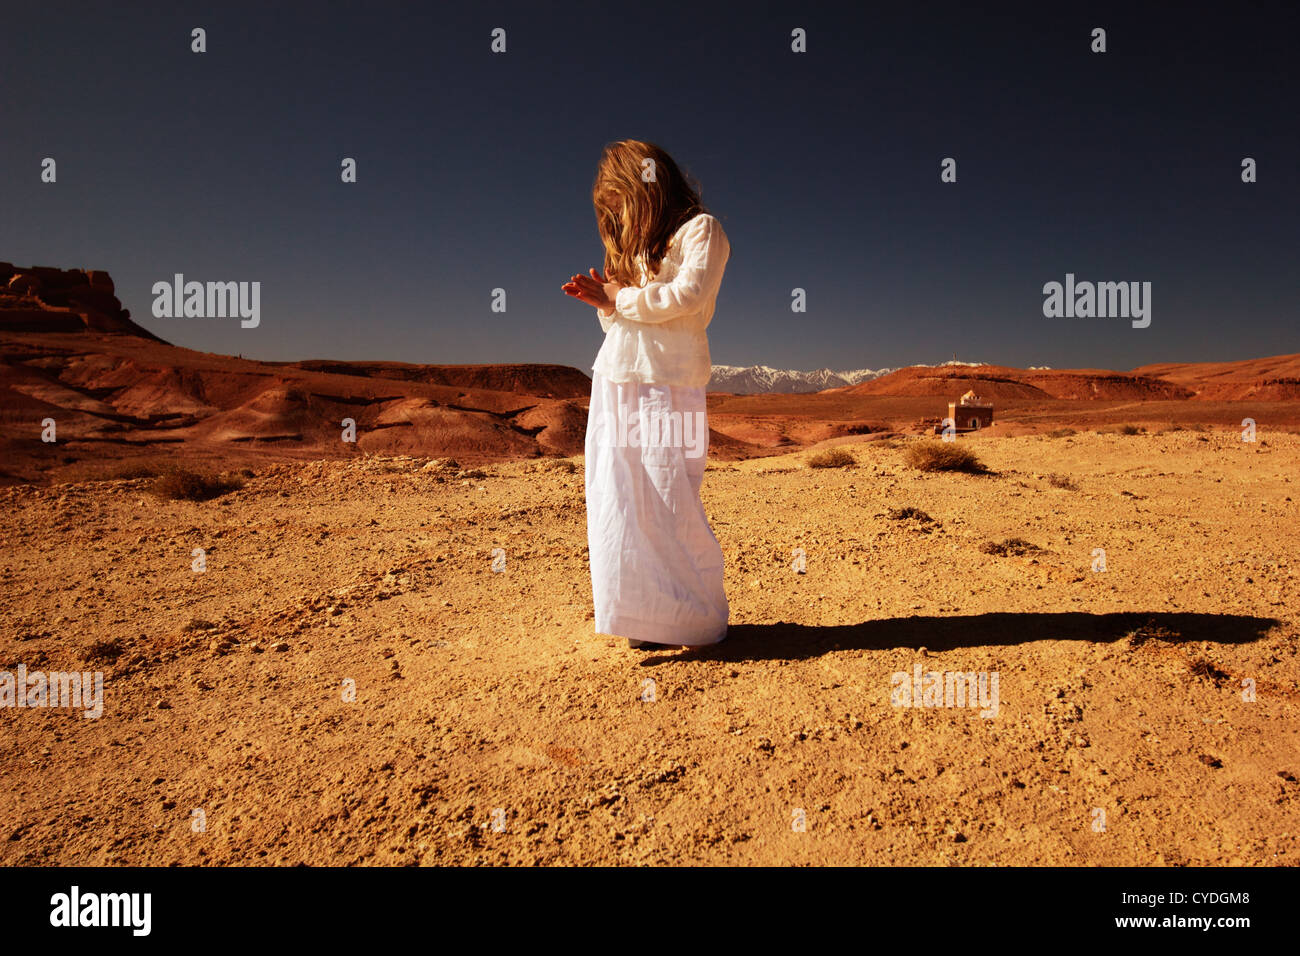 Young girl dressed all in white in the desert of Morocco. Stock Photo